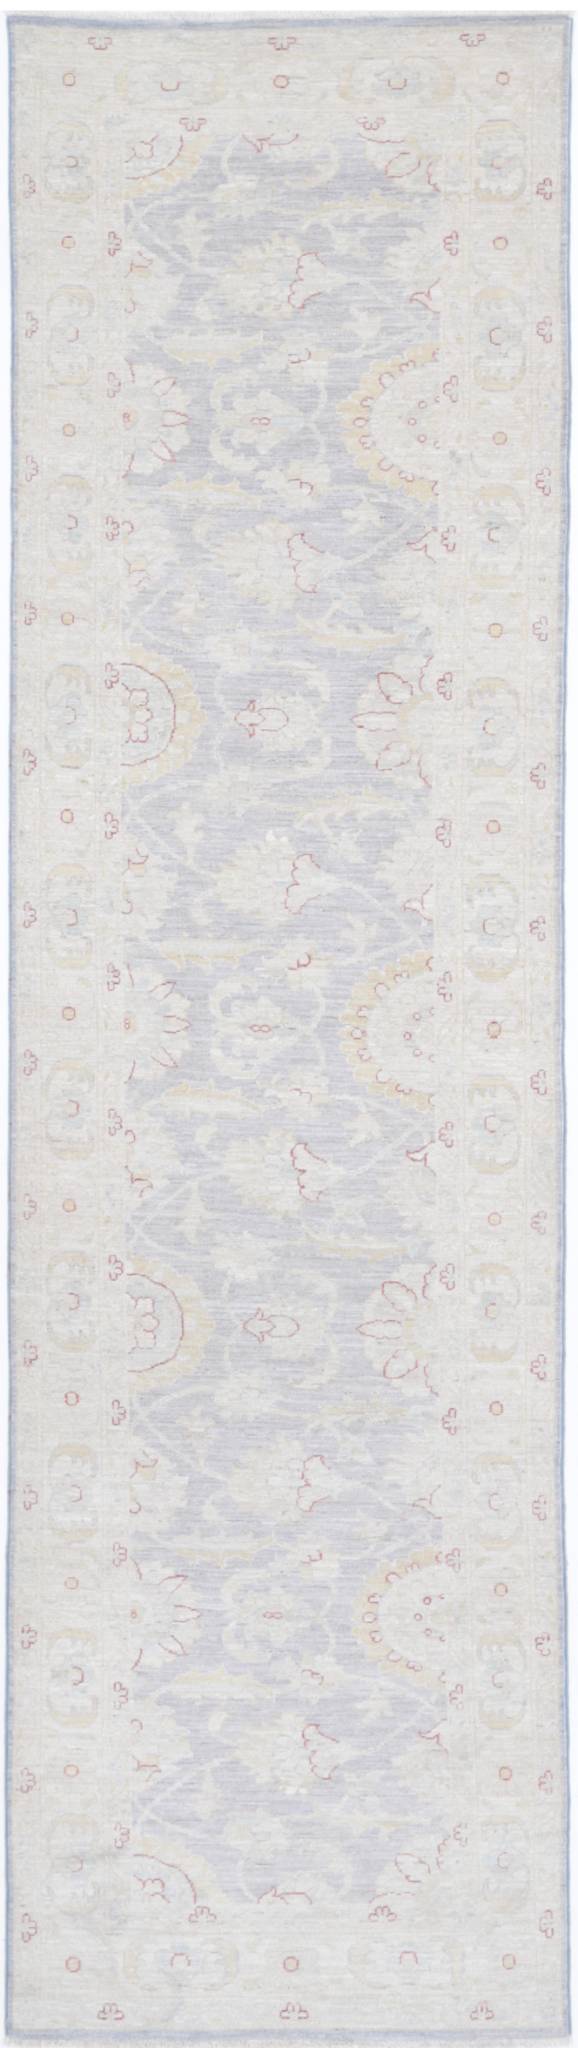 Traditional Hand Knotted Serenity Tabriz Wool Rug of Size 2'9'' X 10'9'' in Grey and Ivory Colors - Made in Afghanistan